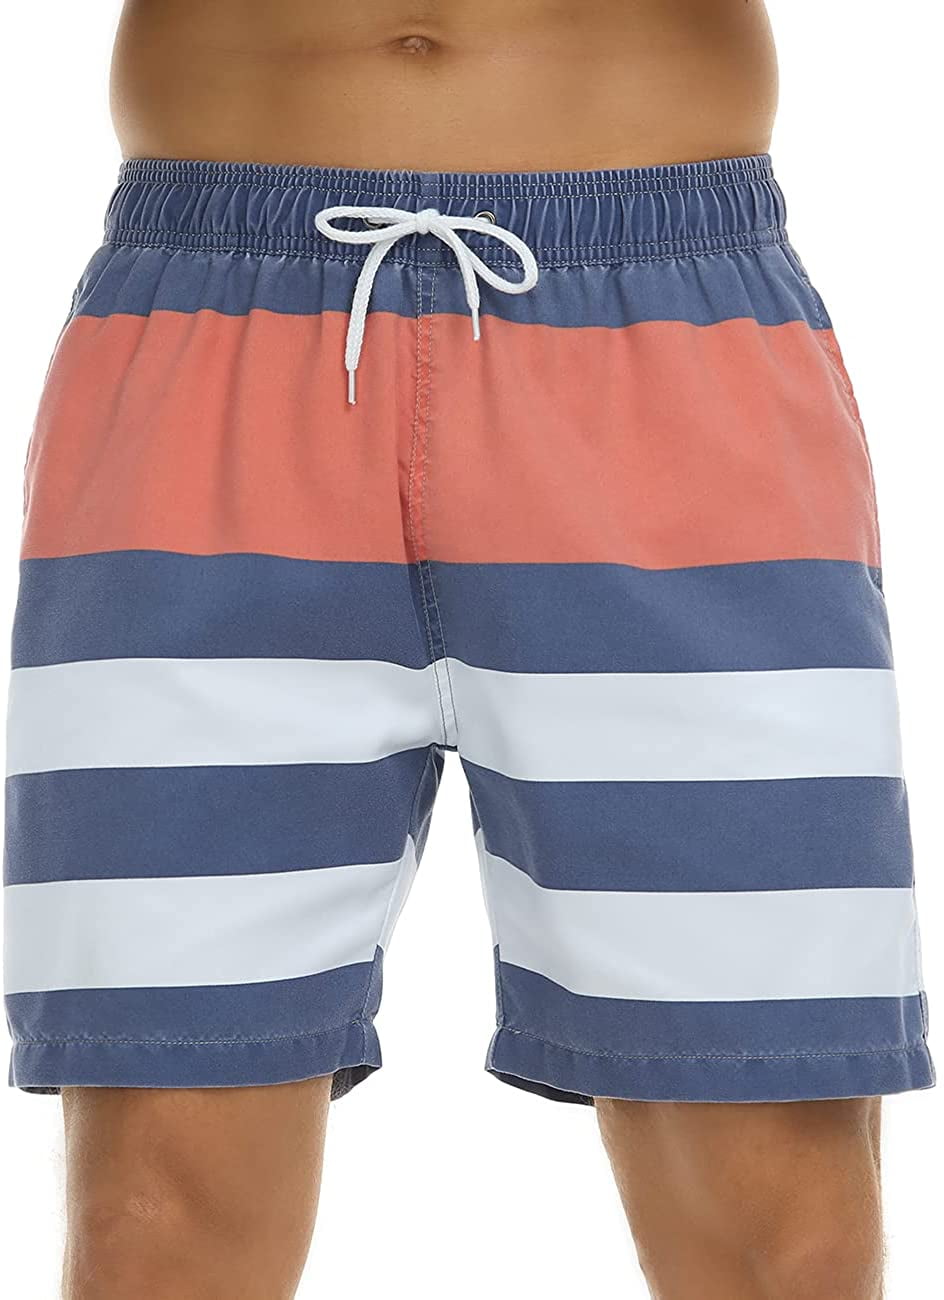 Unitop Mens Beachwear Striped Printed Fast Dry Surf Trunks with Side Pocket 